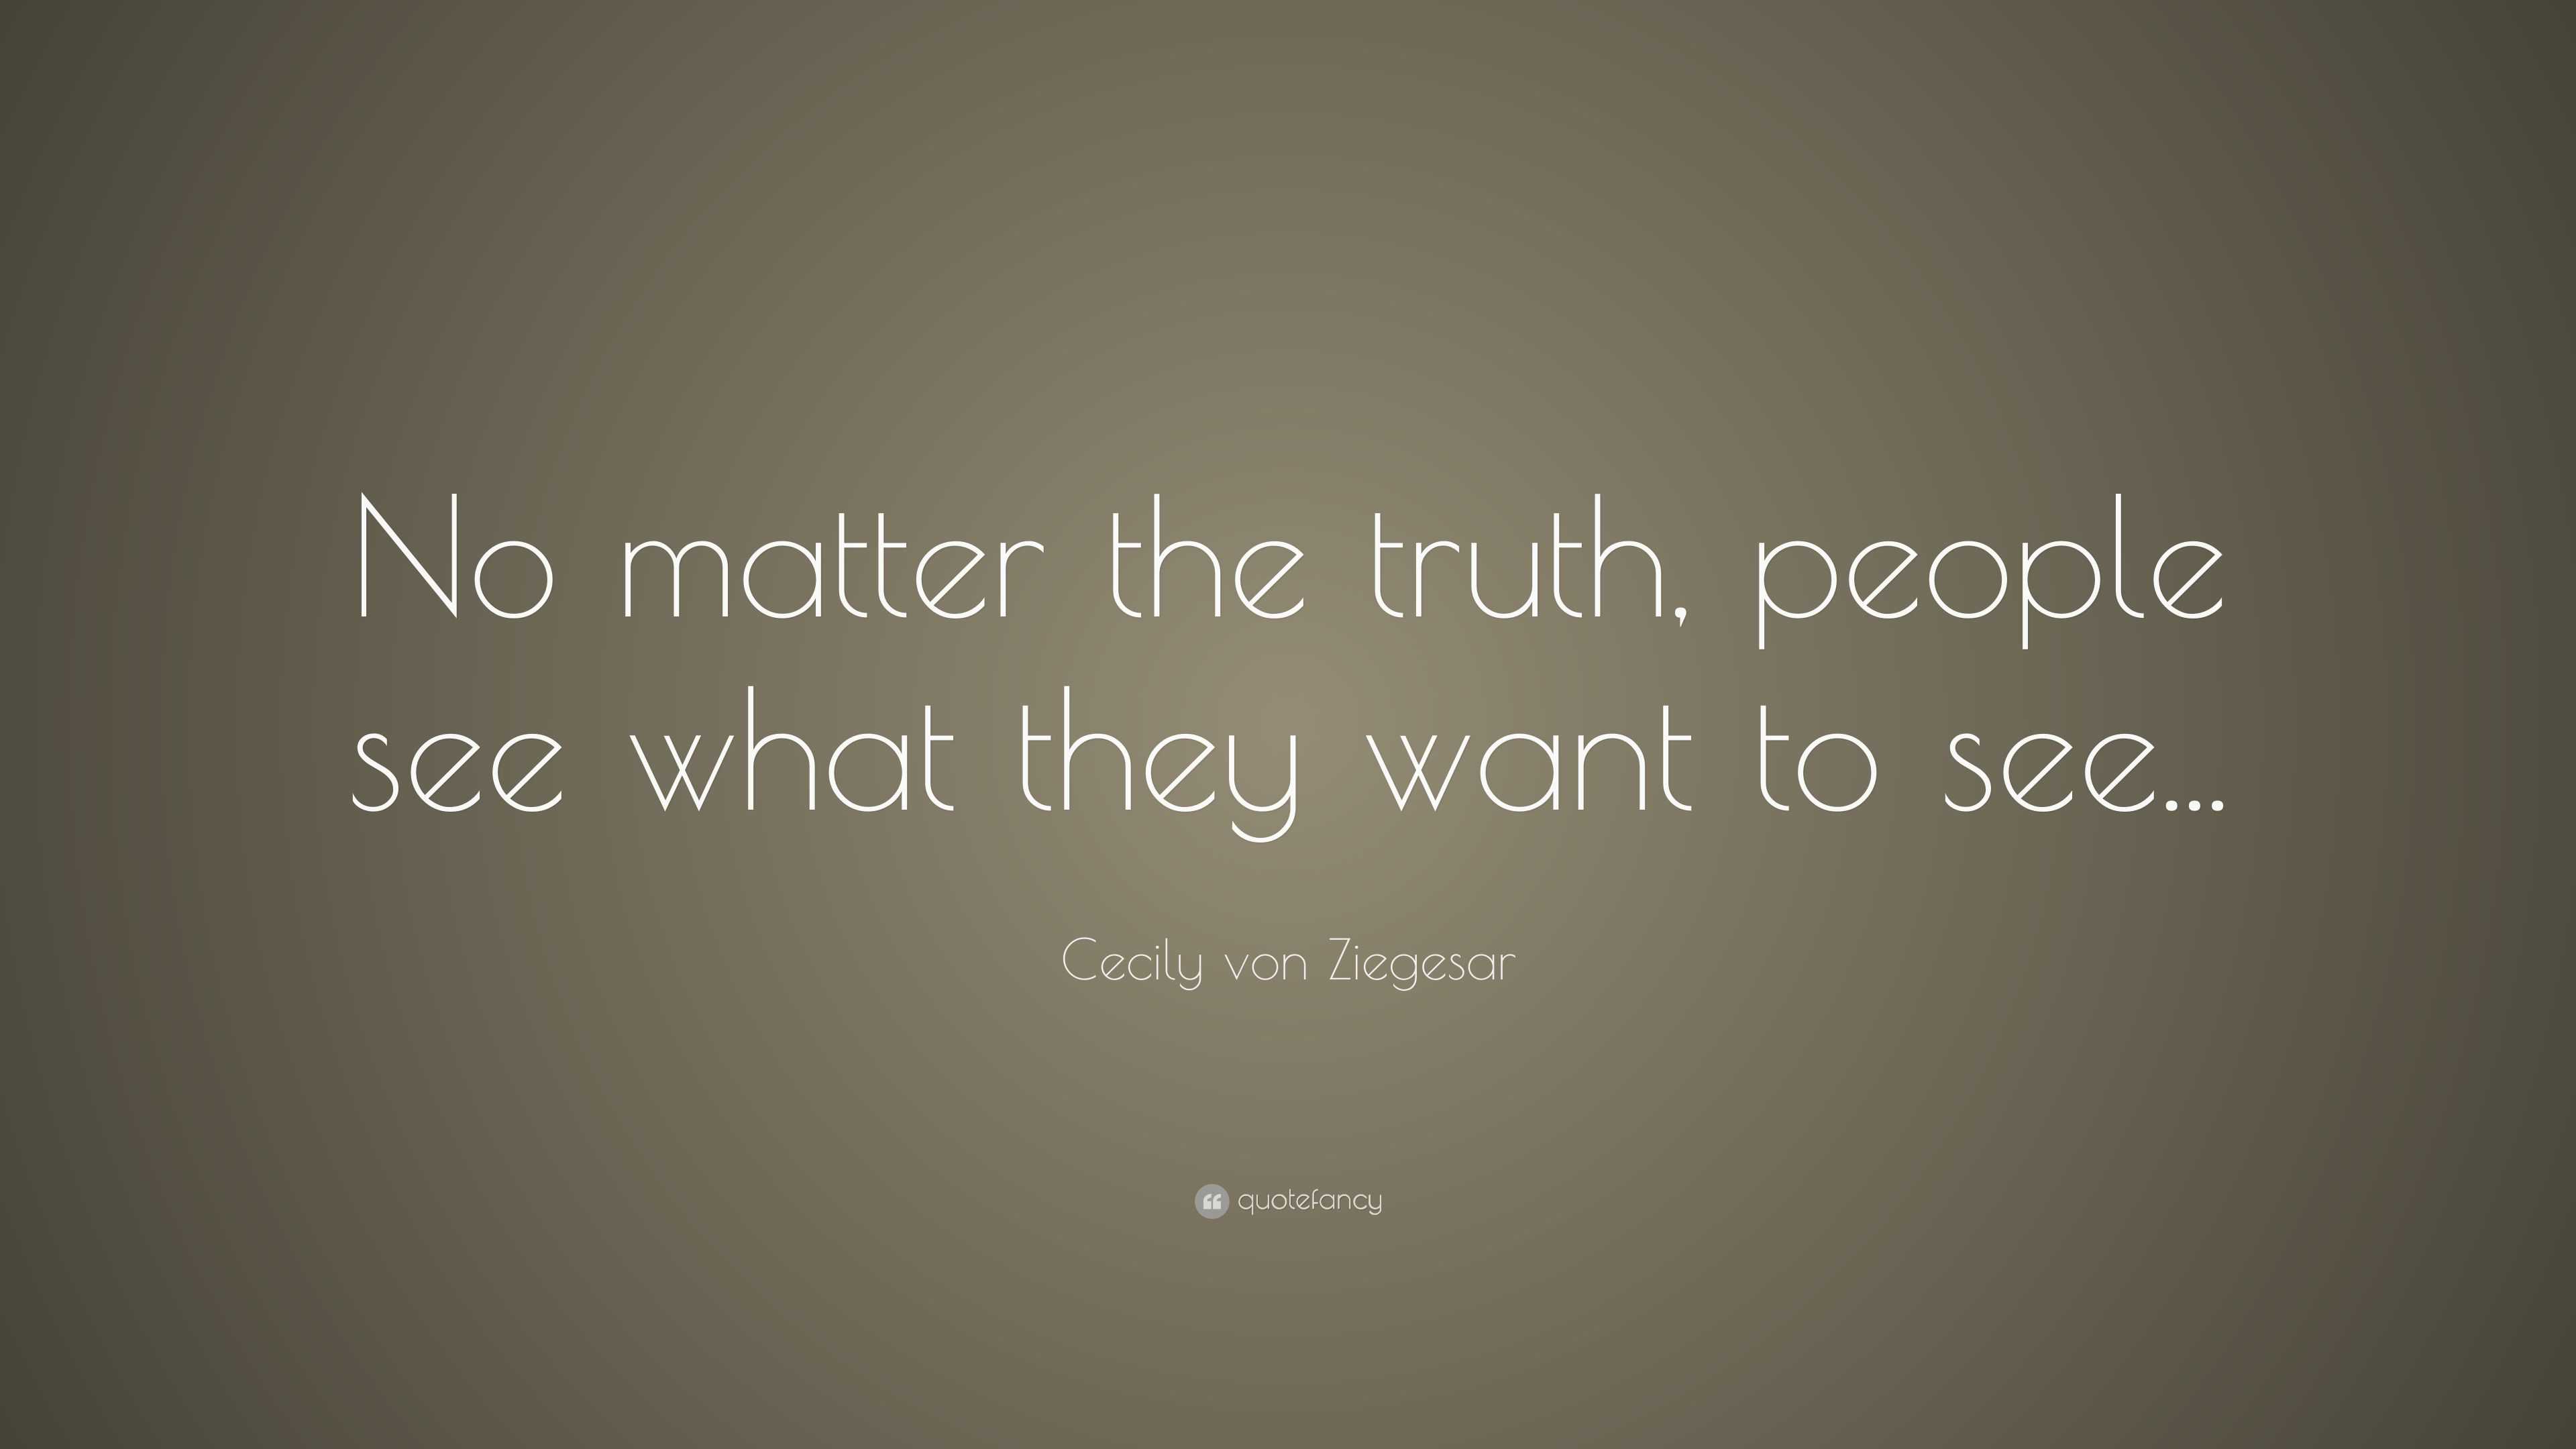 Cecily von Ziegesar Quote: “No matter the truth, people see what they ...